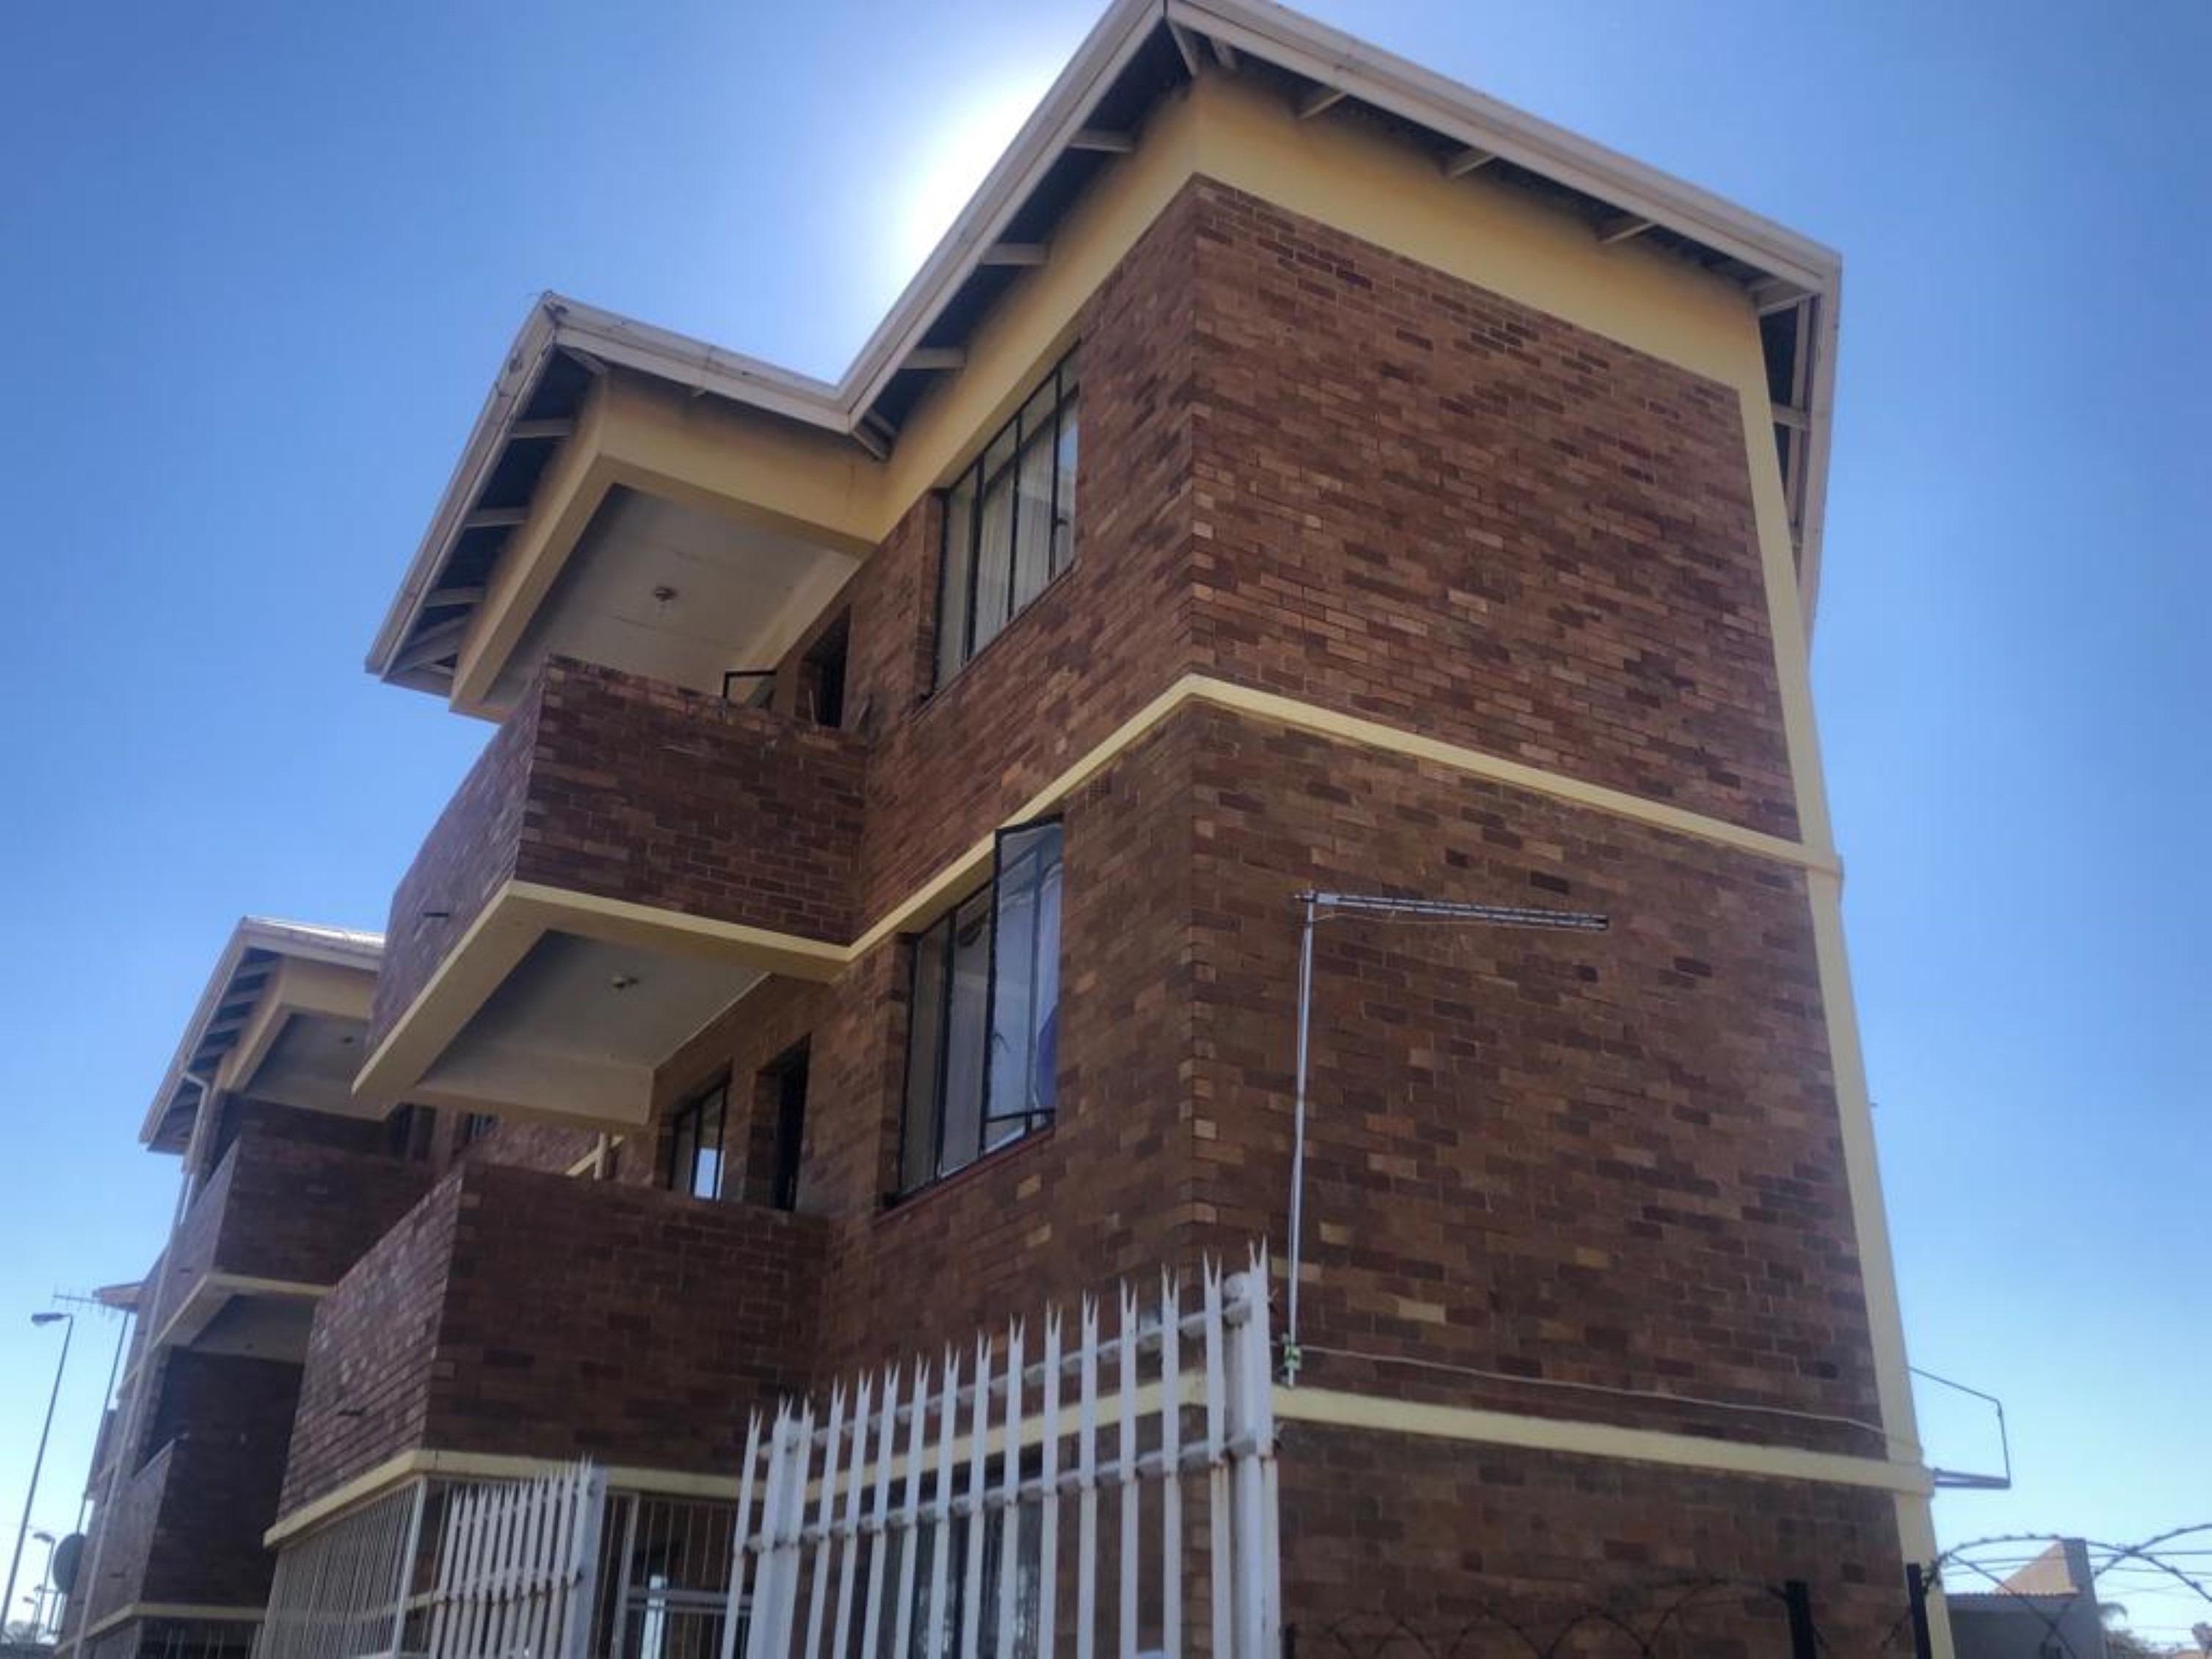 2 Bedroomed Flat in Theo's Court (pty)ltd